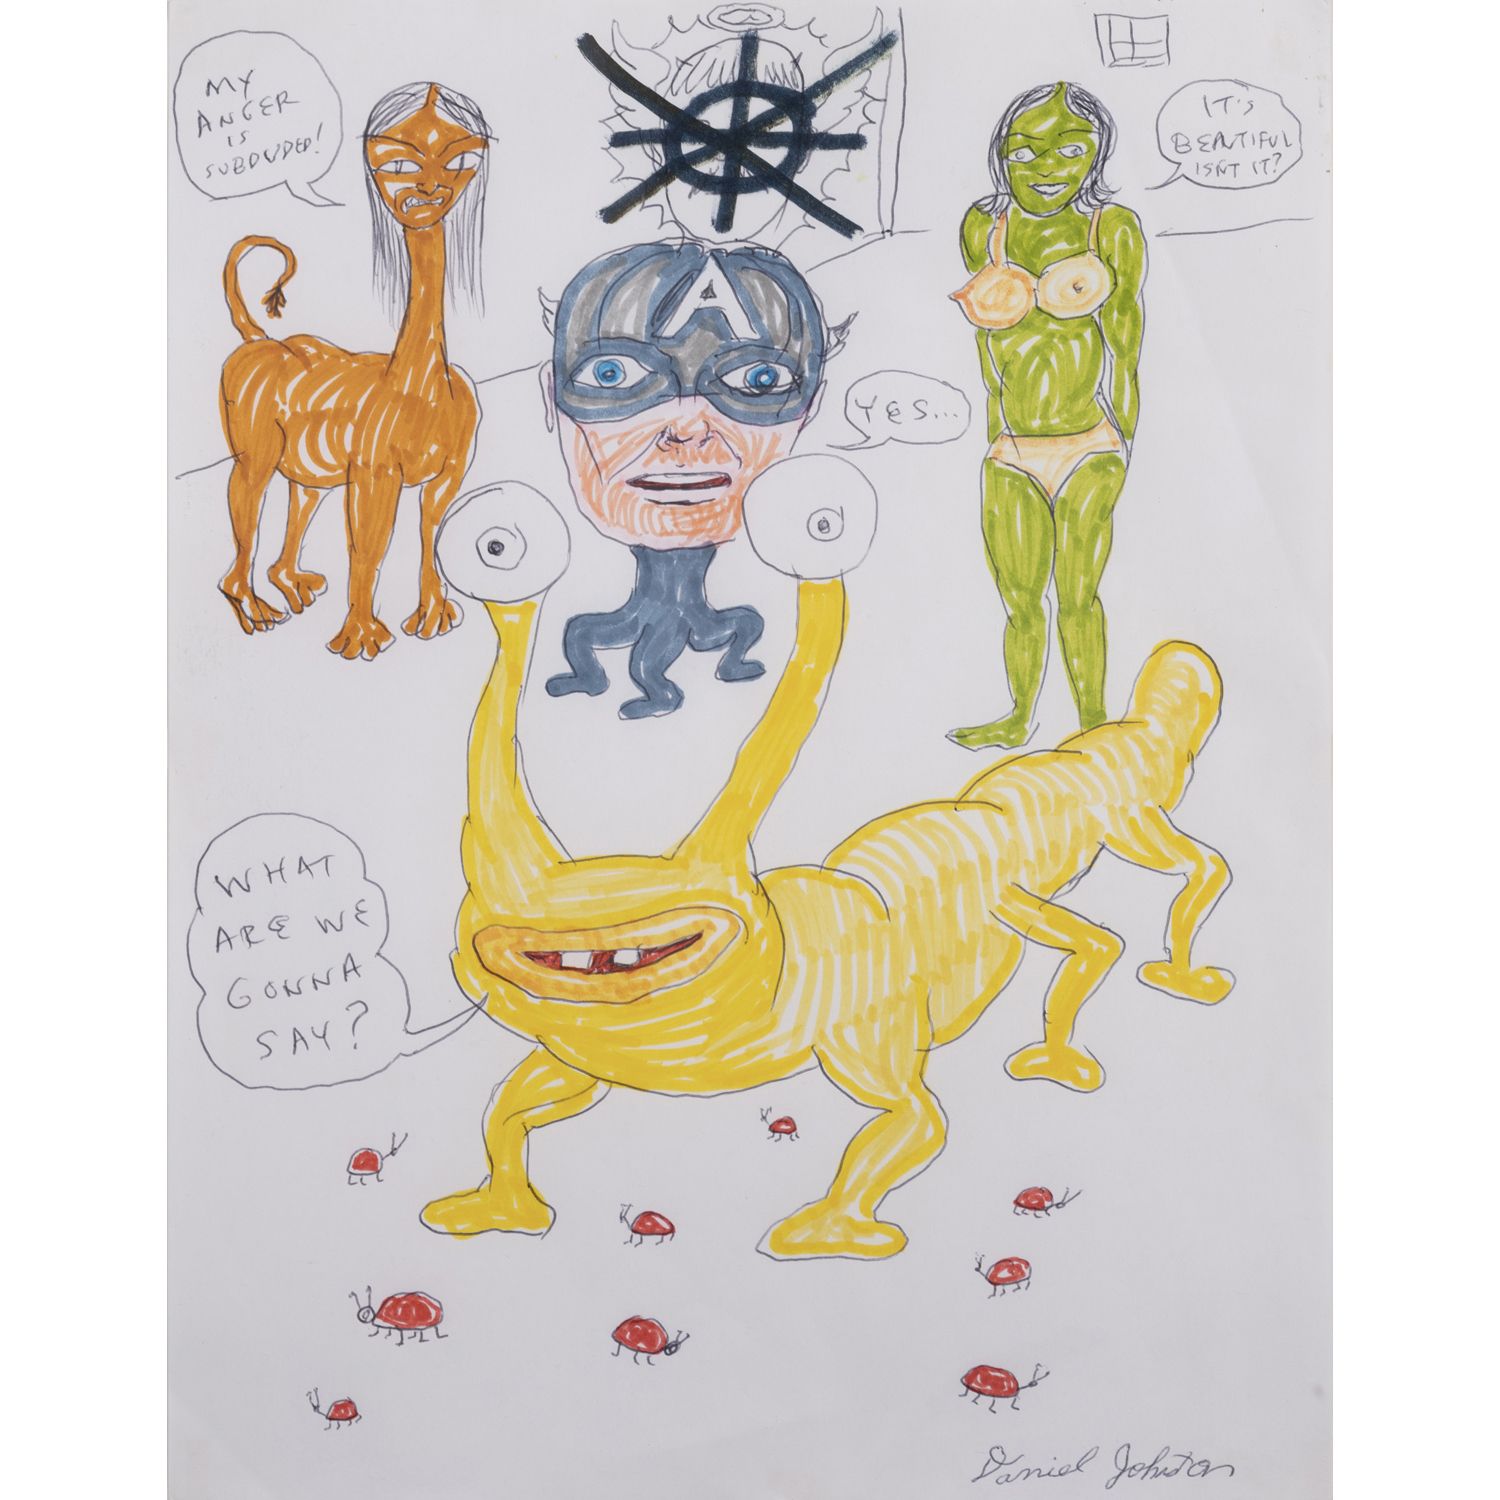 Null Daniel Johnston (1961-2019)

What are we gonna say, circa 2000

Ballpoint p&hellip;